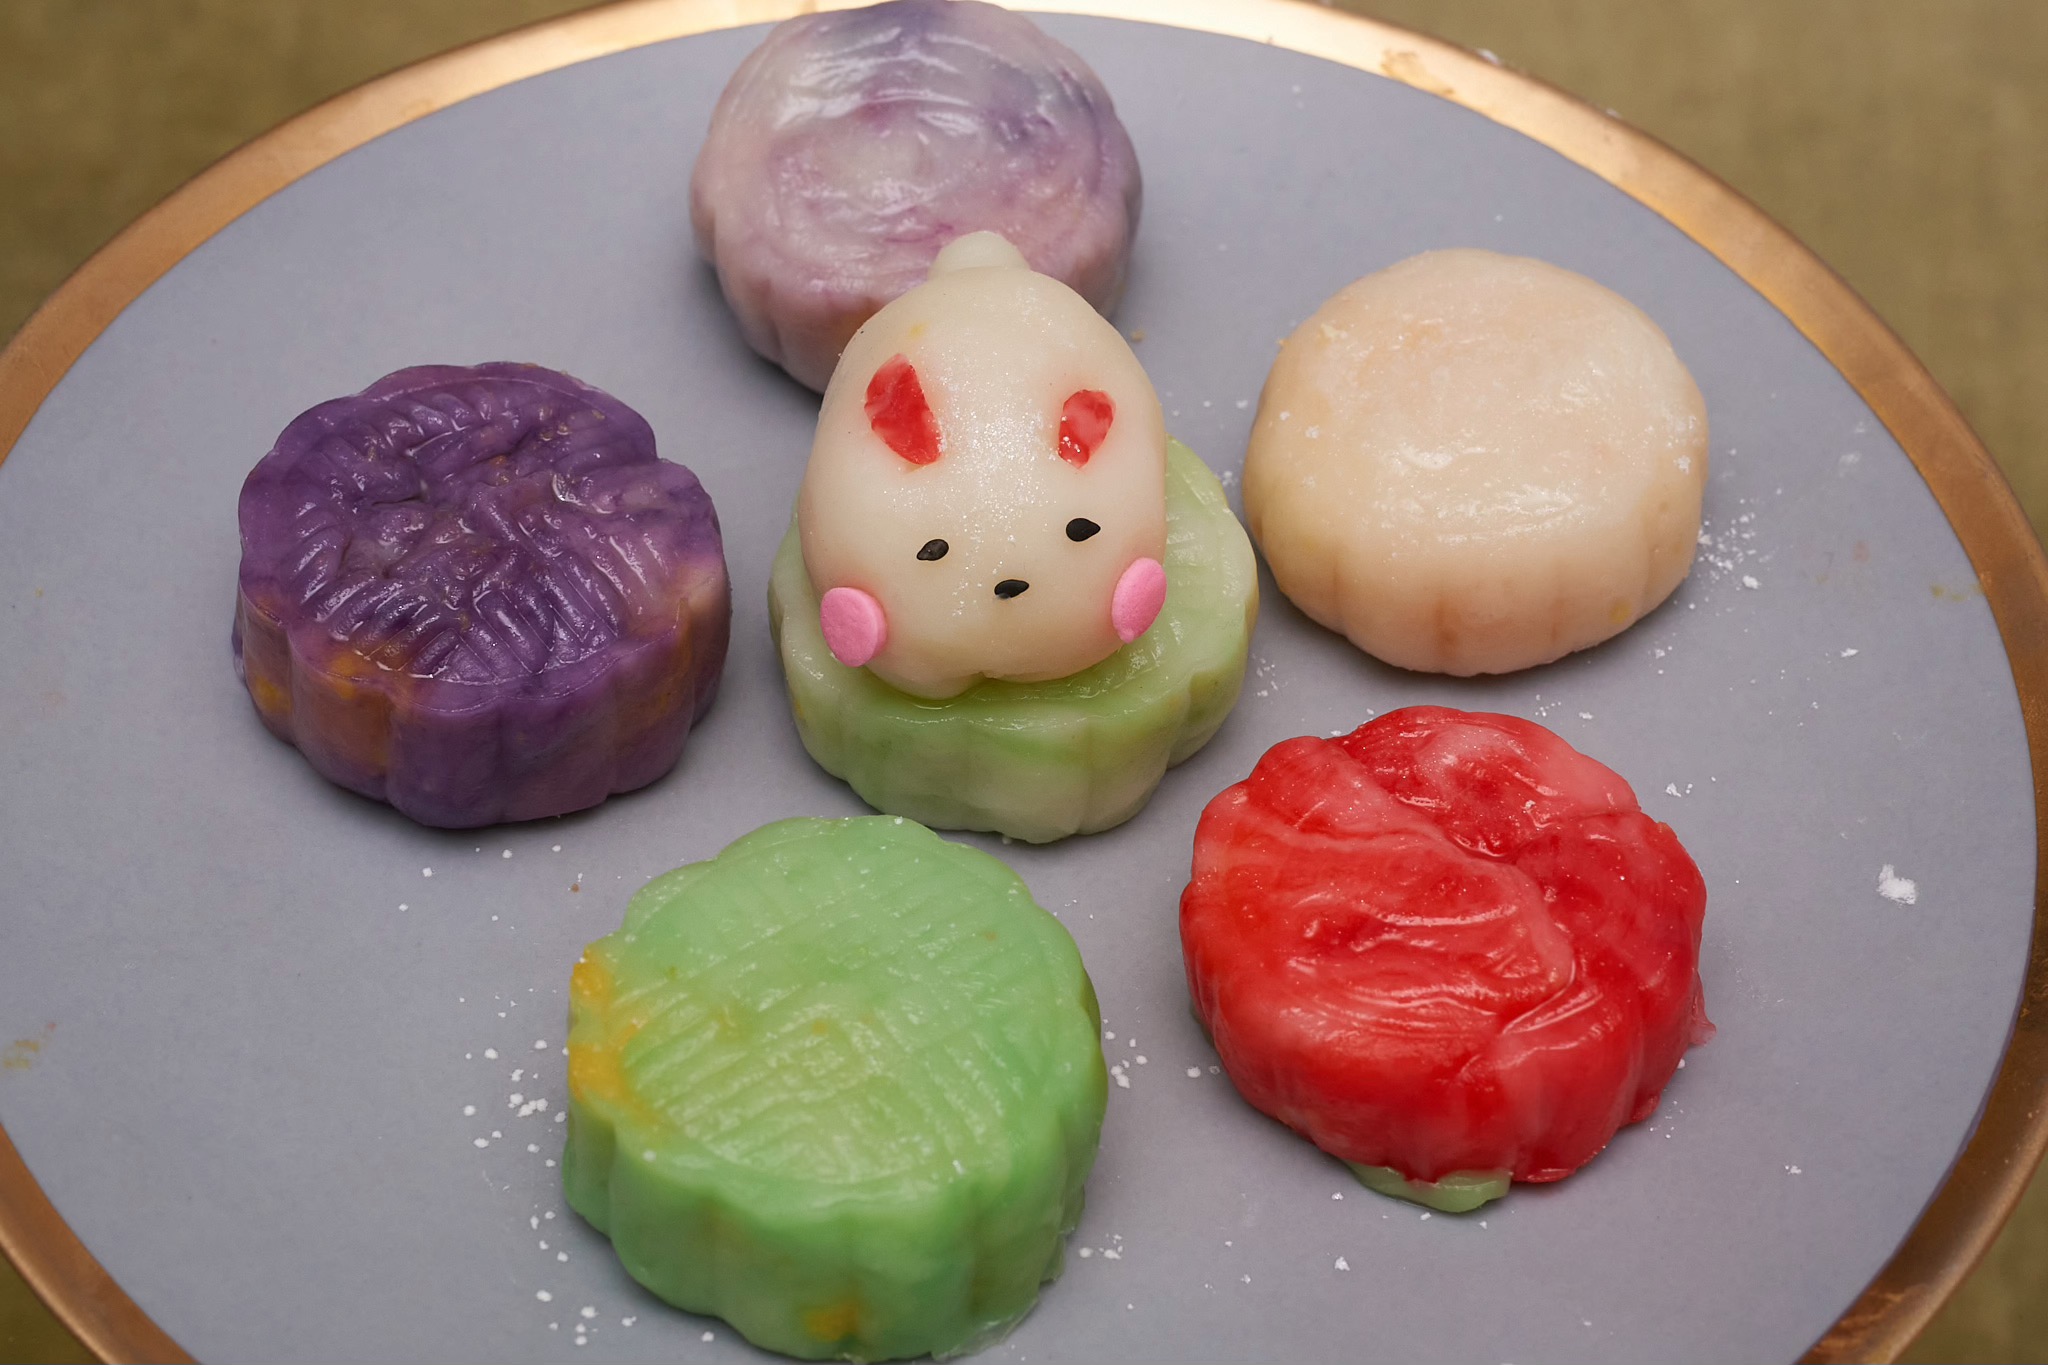 Rainbow Chinese Pastries, Traditional Asian Pastries Mooncakes Gift bo